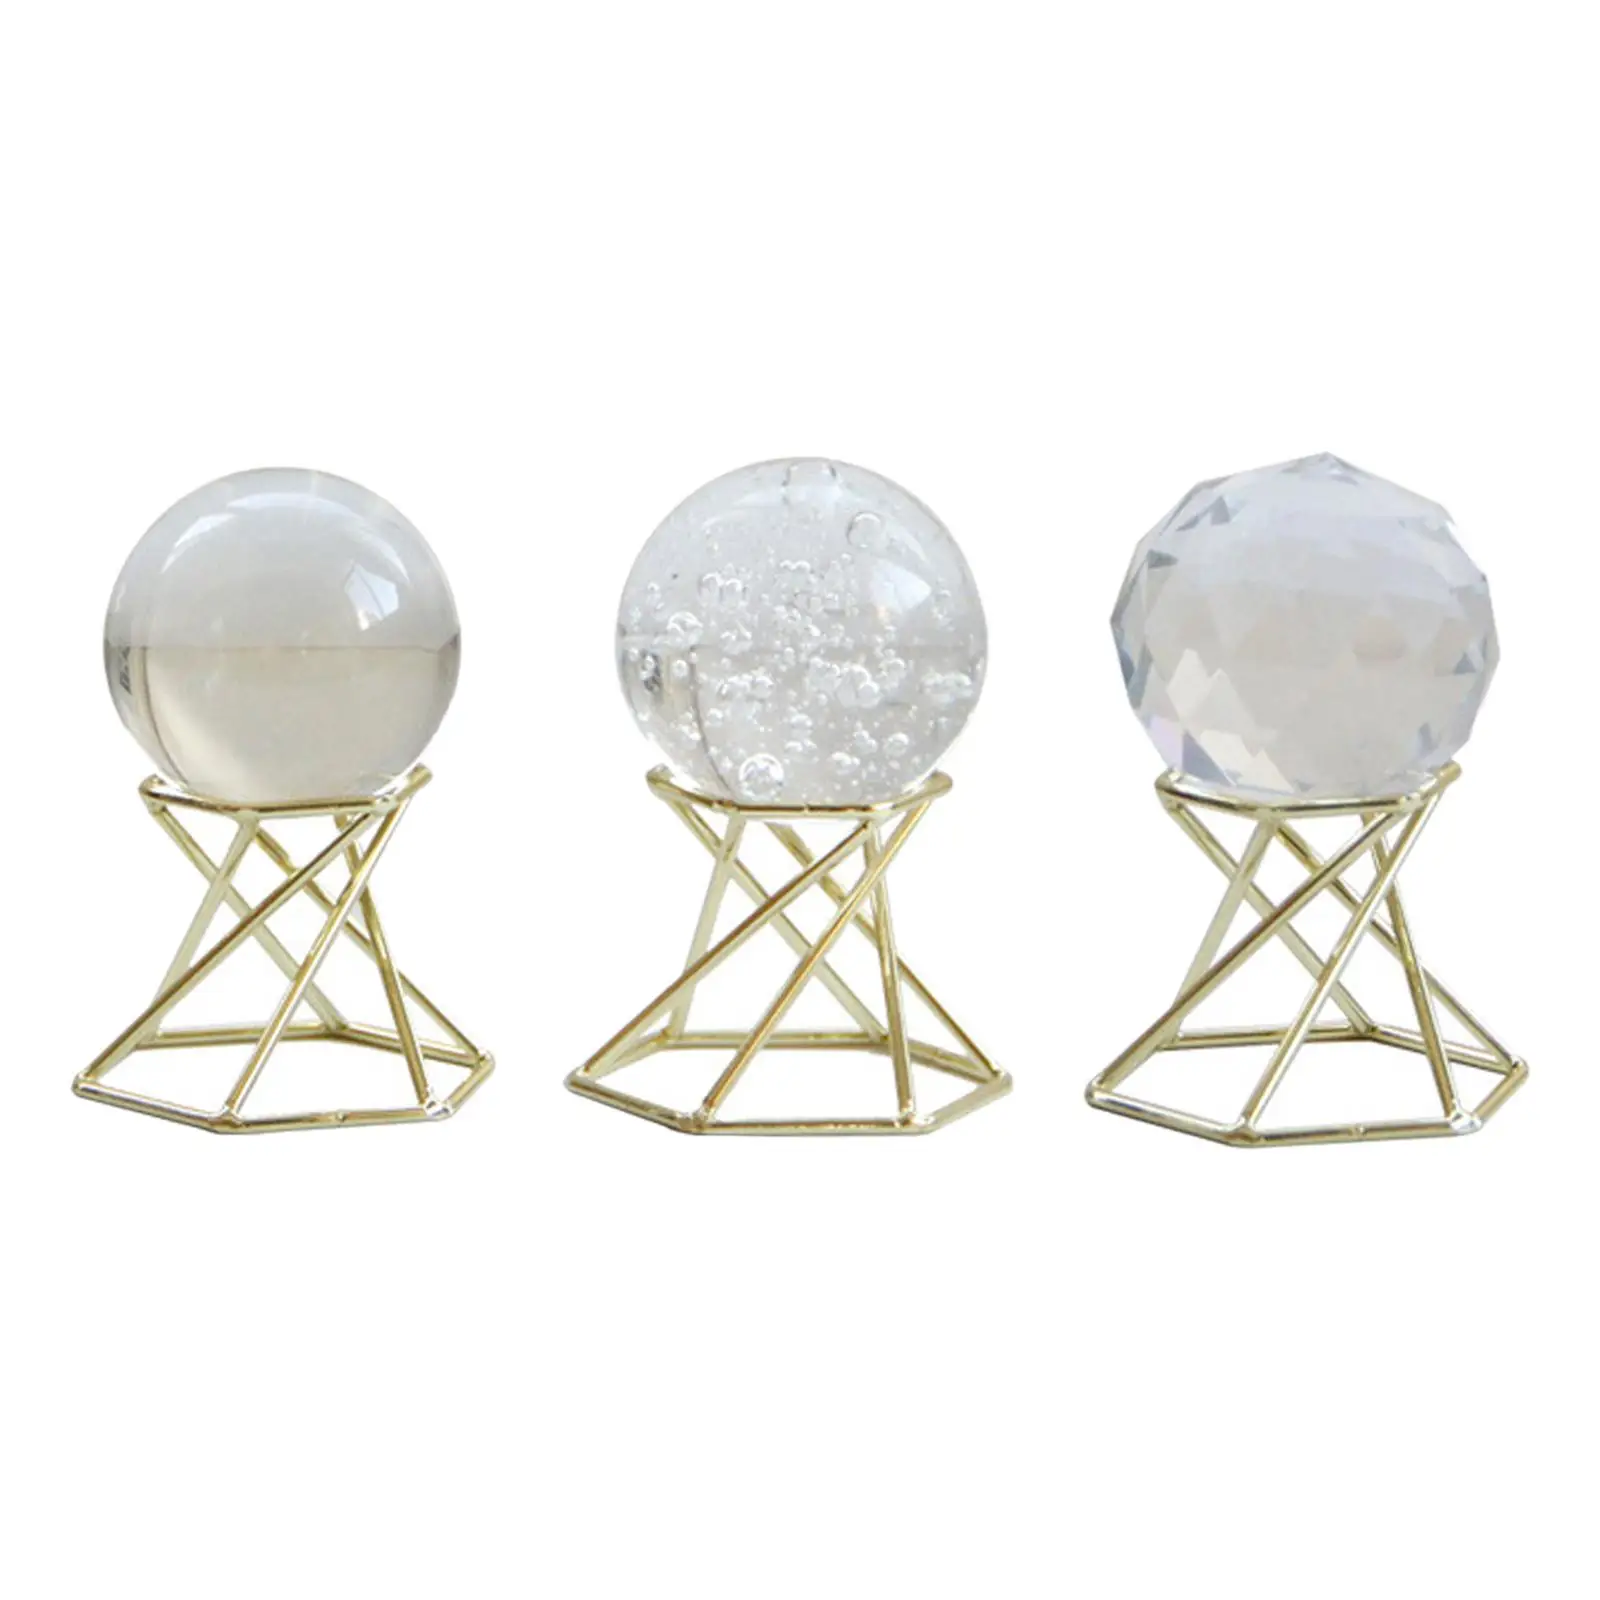 Creative Ball with Metal Stand Collectable Craft Ball Holder for Restaurant Table Bedroom Decor Gift